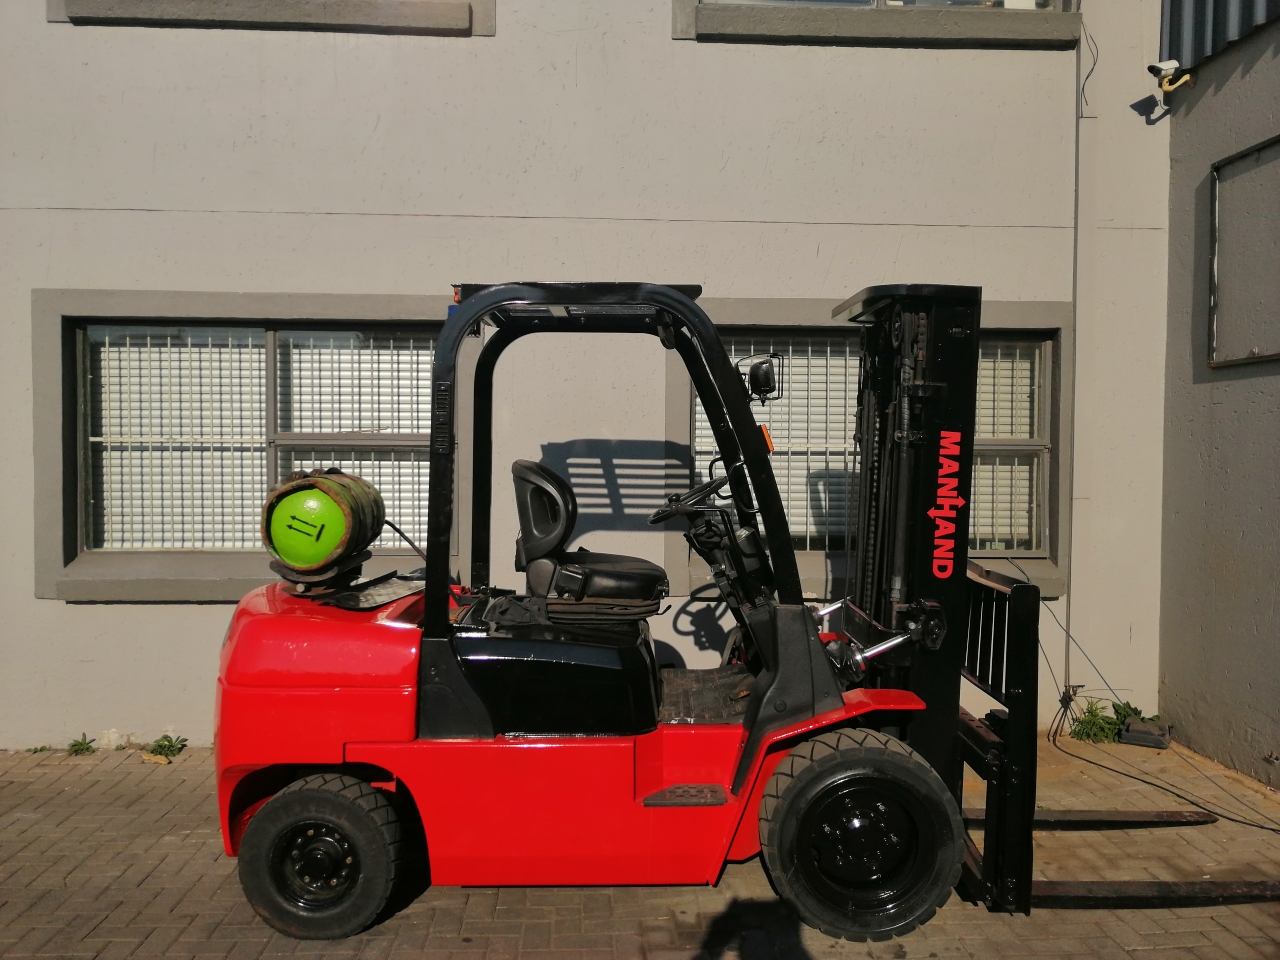 Manhand 3 Ton Dual Fuel Forklift For Sale Junk Mail